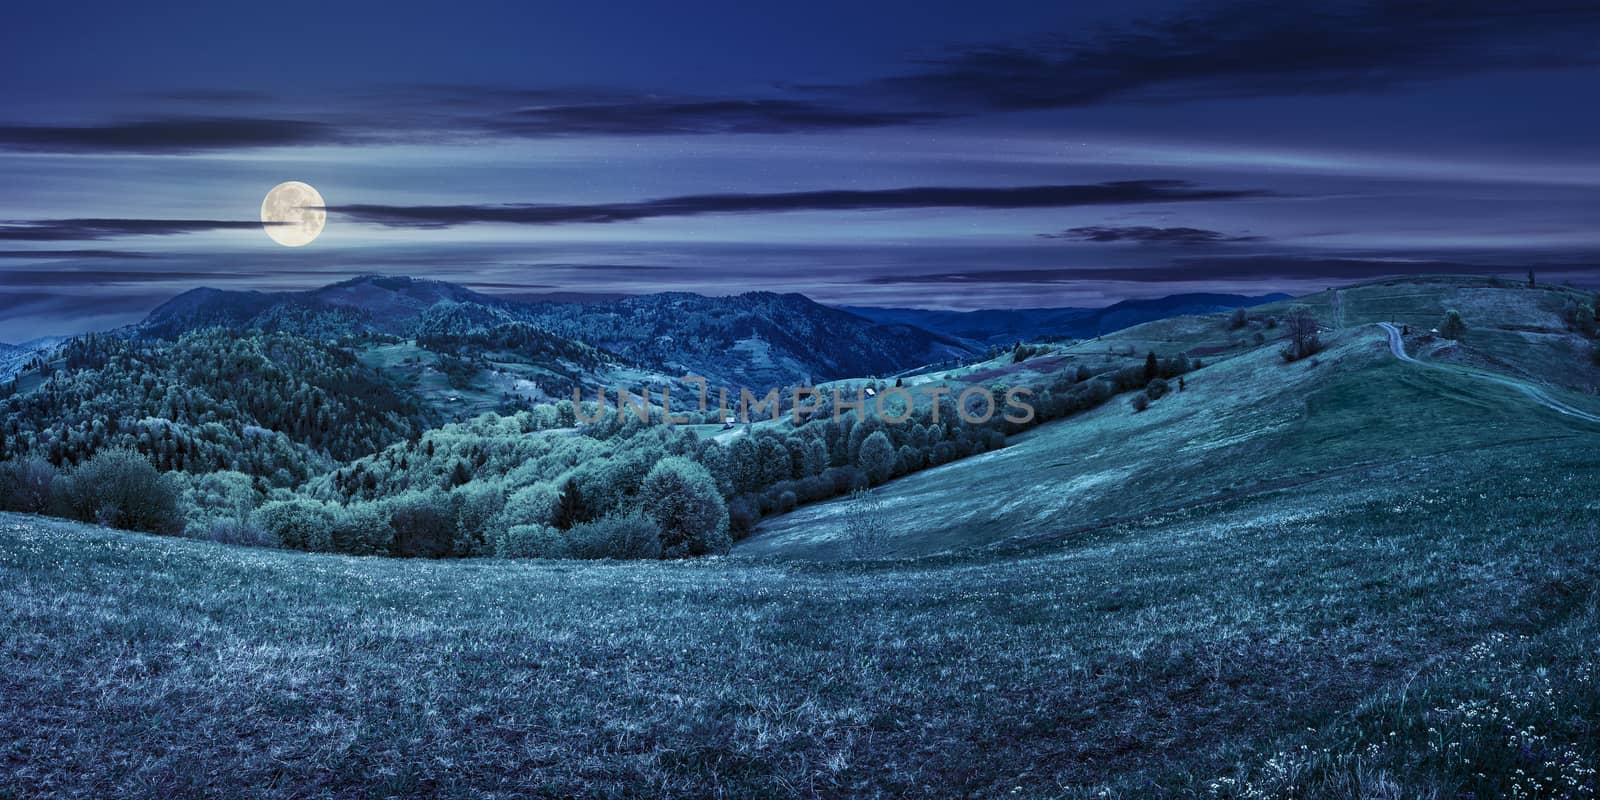 Idyllic view of pretty farmland rolling hills. Rural landscape near the forest in mountains at night in full moon light